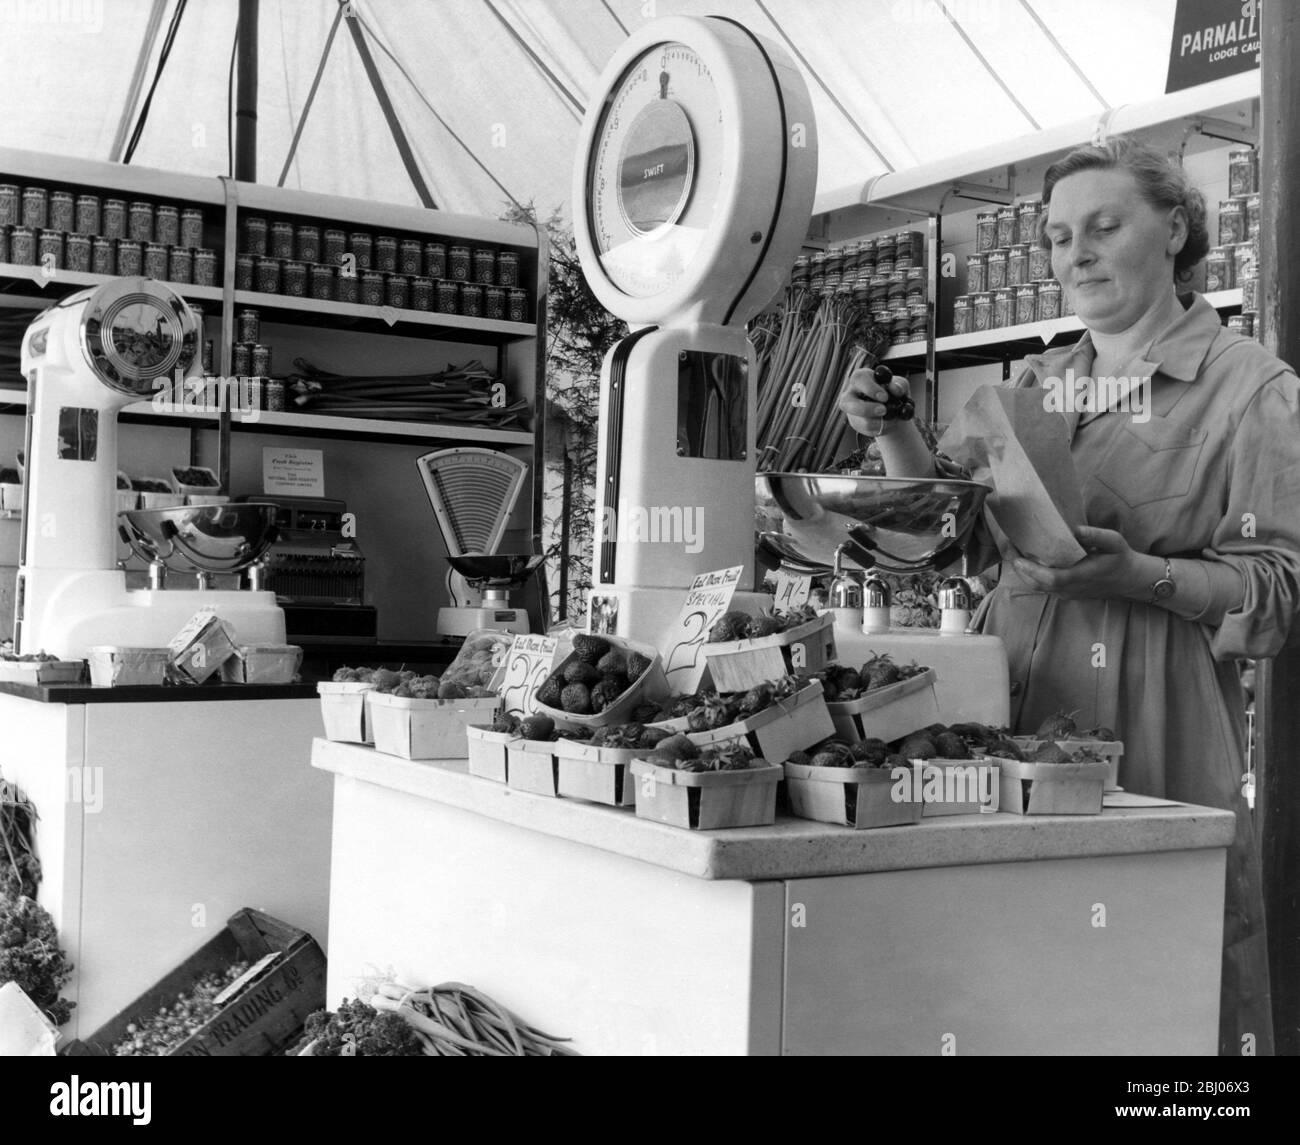 Grocer's shop in the 1950s. - Stock Photo